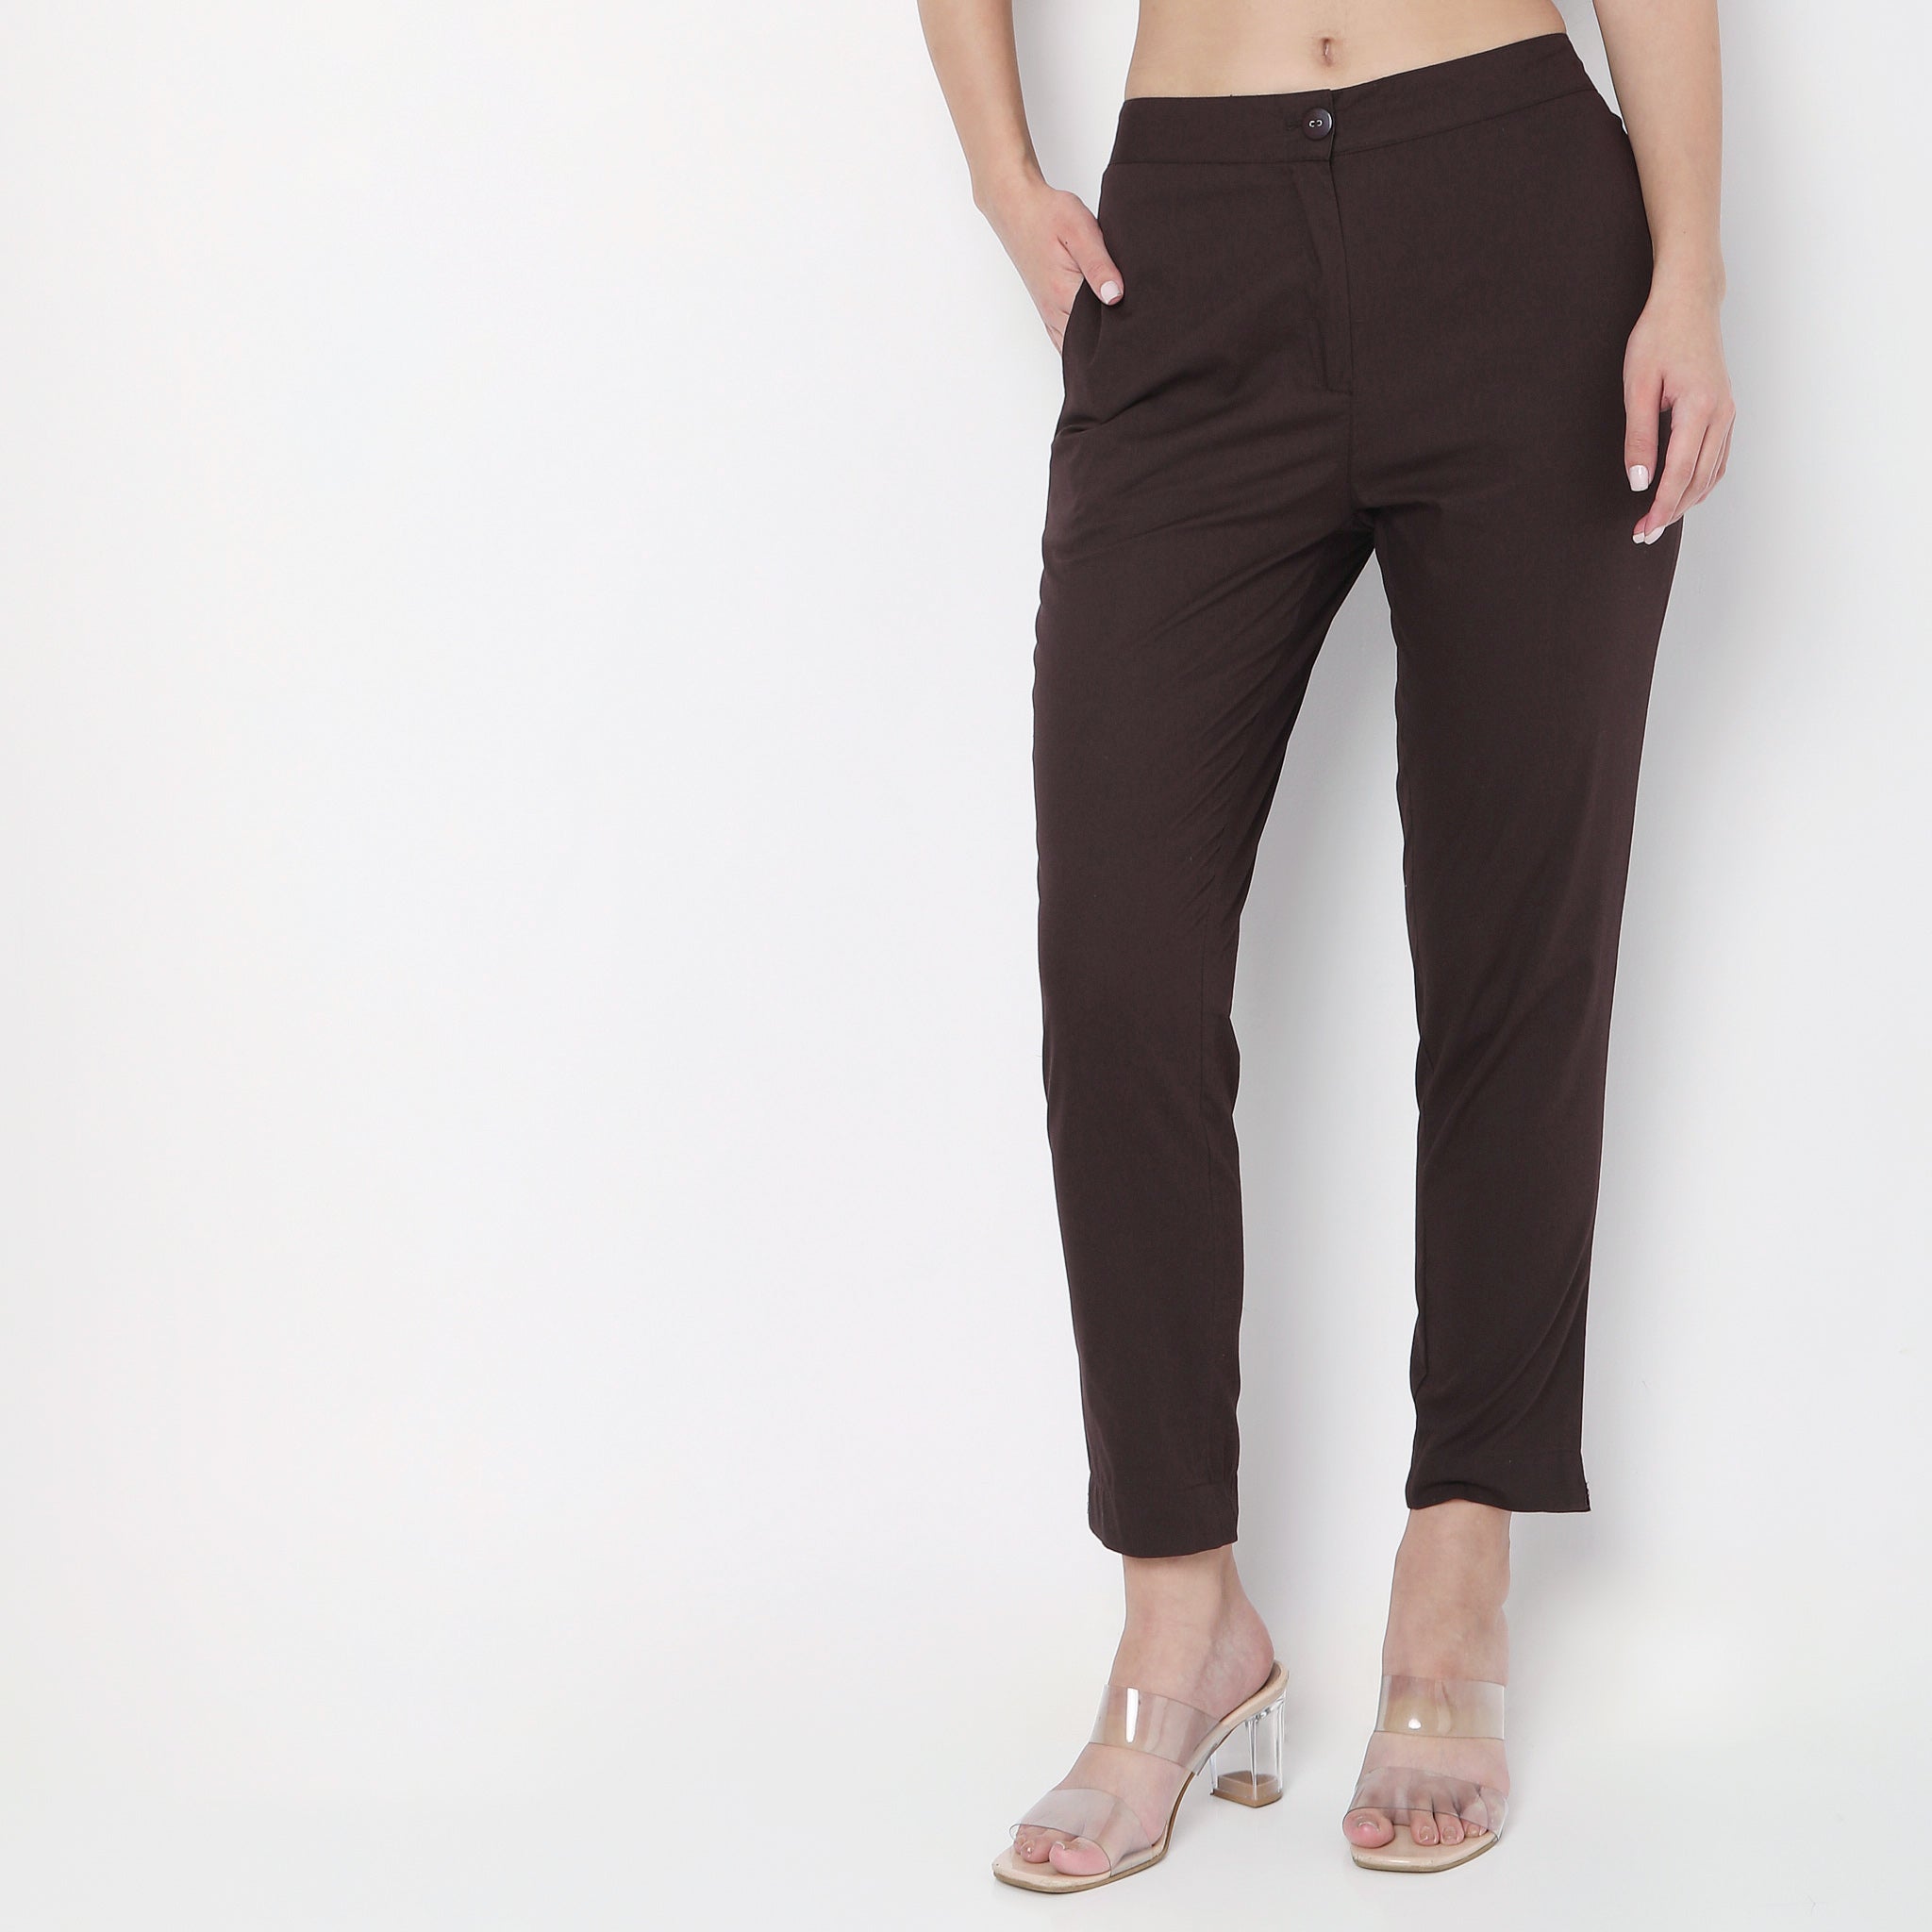 Women Wearing Slim Fit Solid Mid Rise Pant